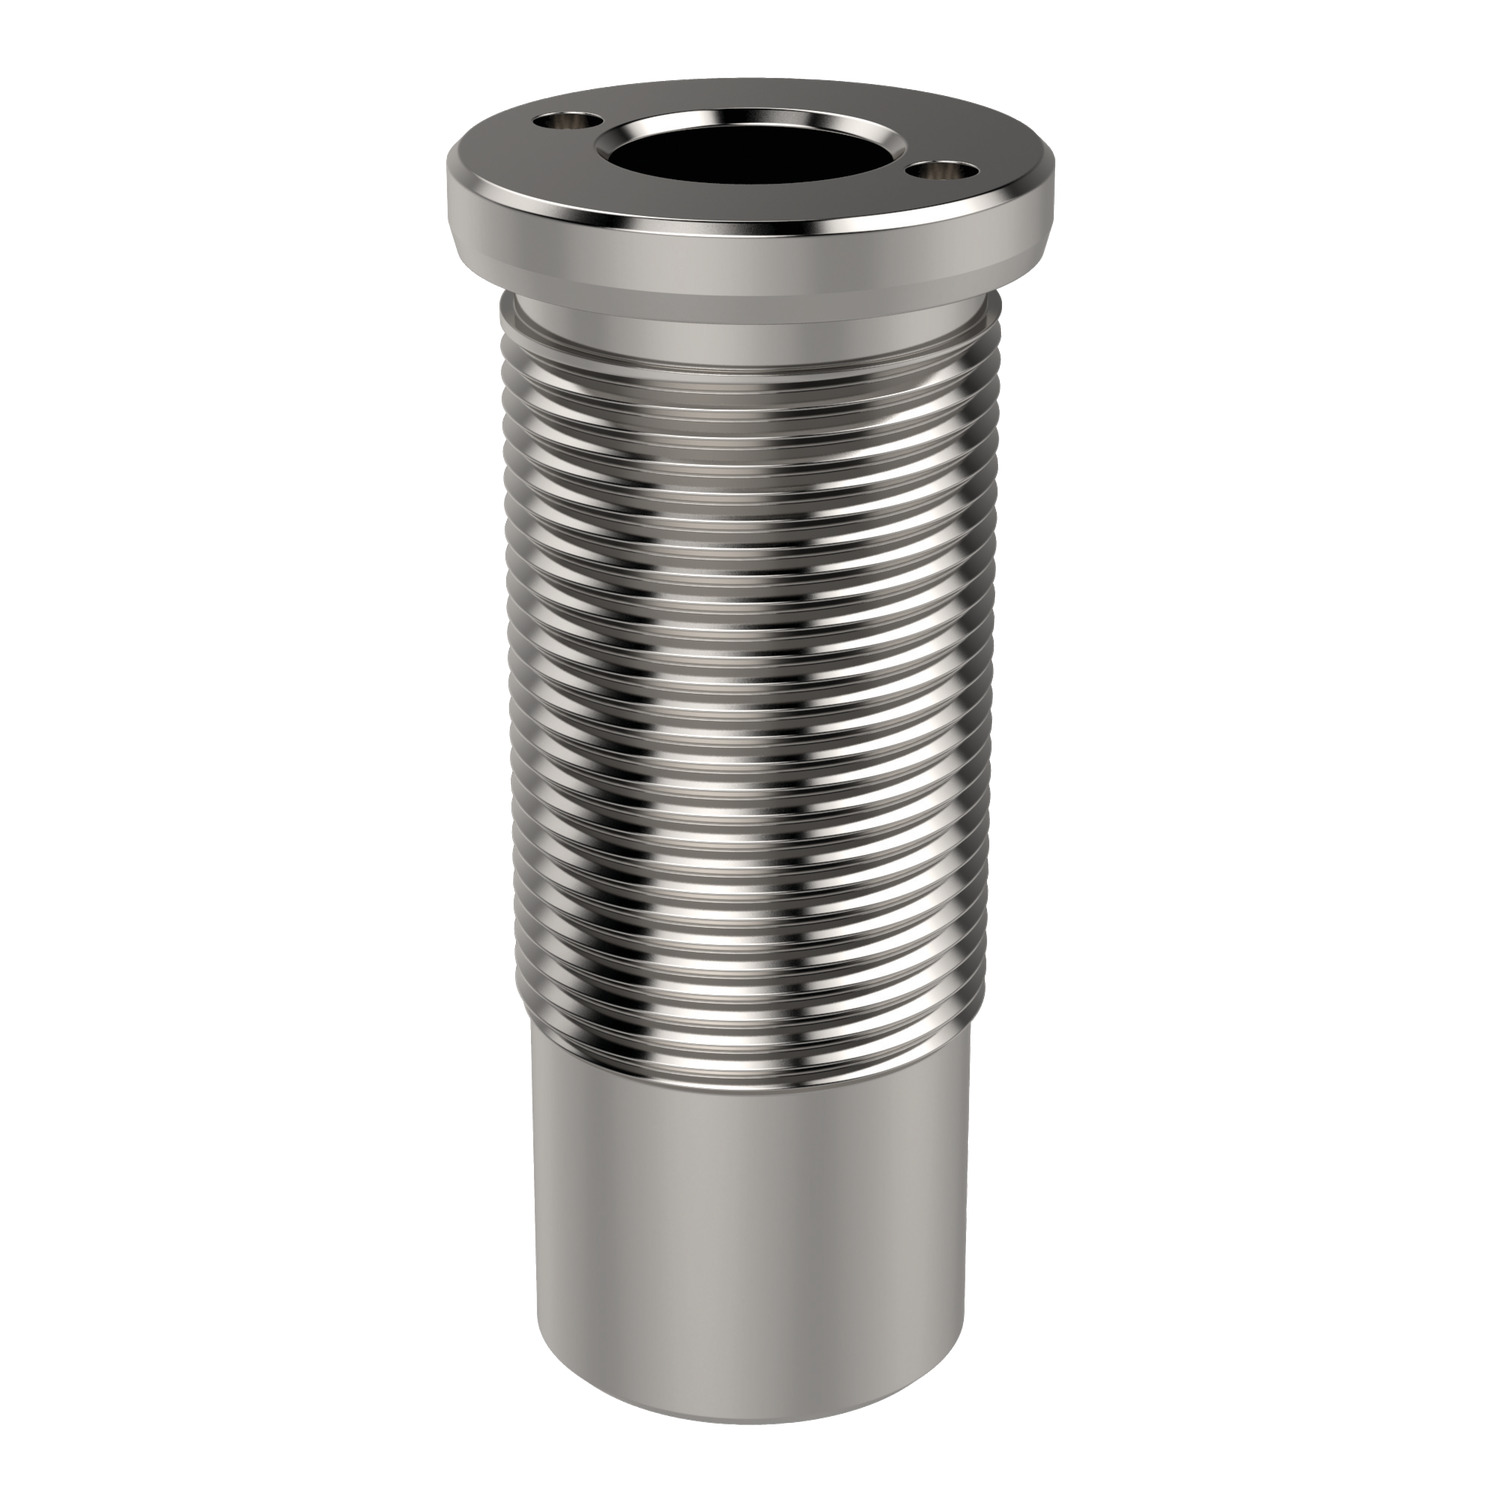 33442.W1900 Locating Bushings- Plain For use with Lifting Pins without seal- 8 -M16 x1.5